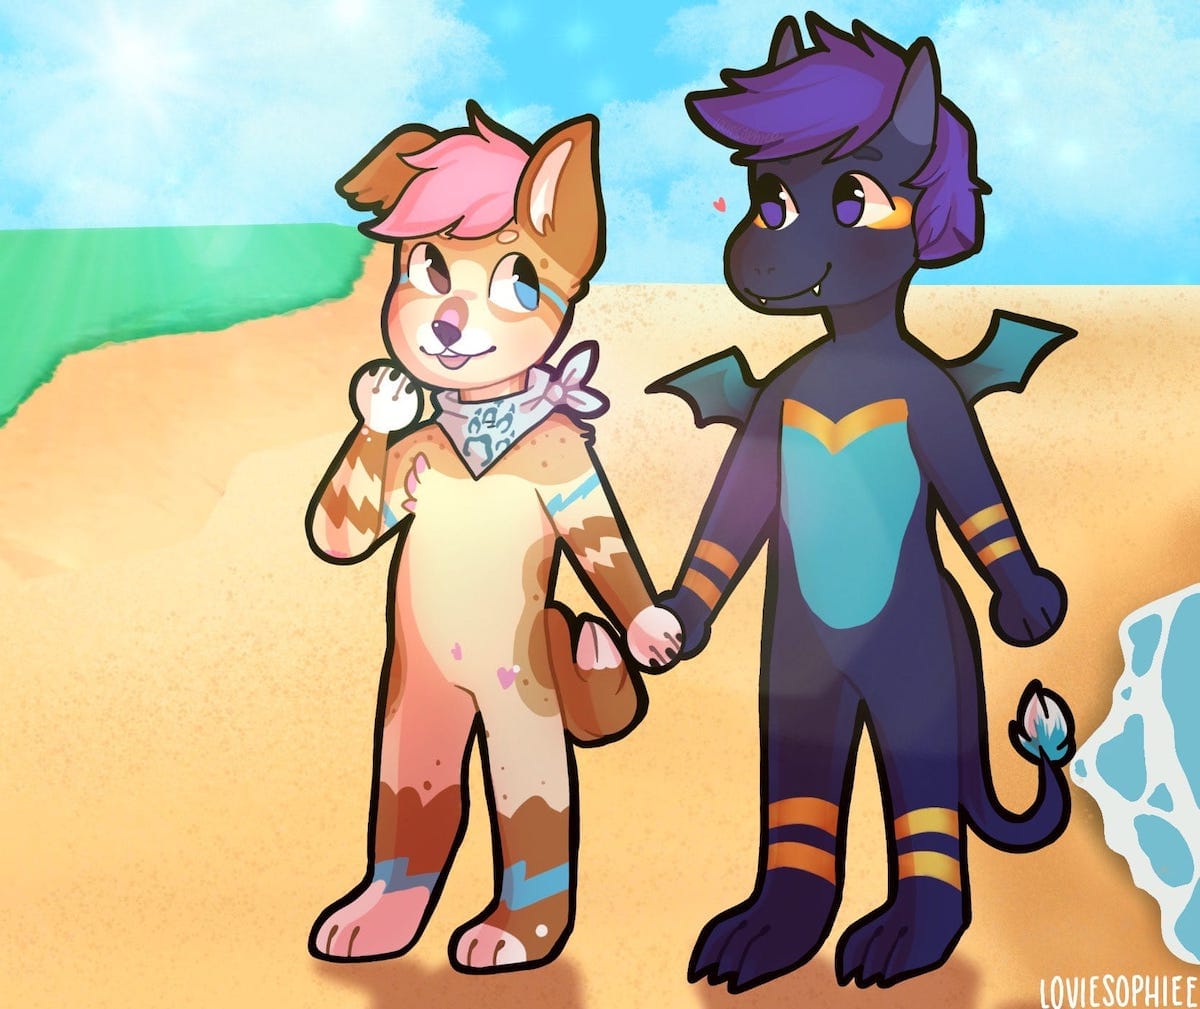 A drawing of Bowie and Styxx on a beach in an Animal Crossing style by Sophie